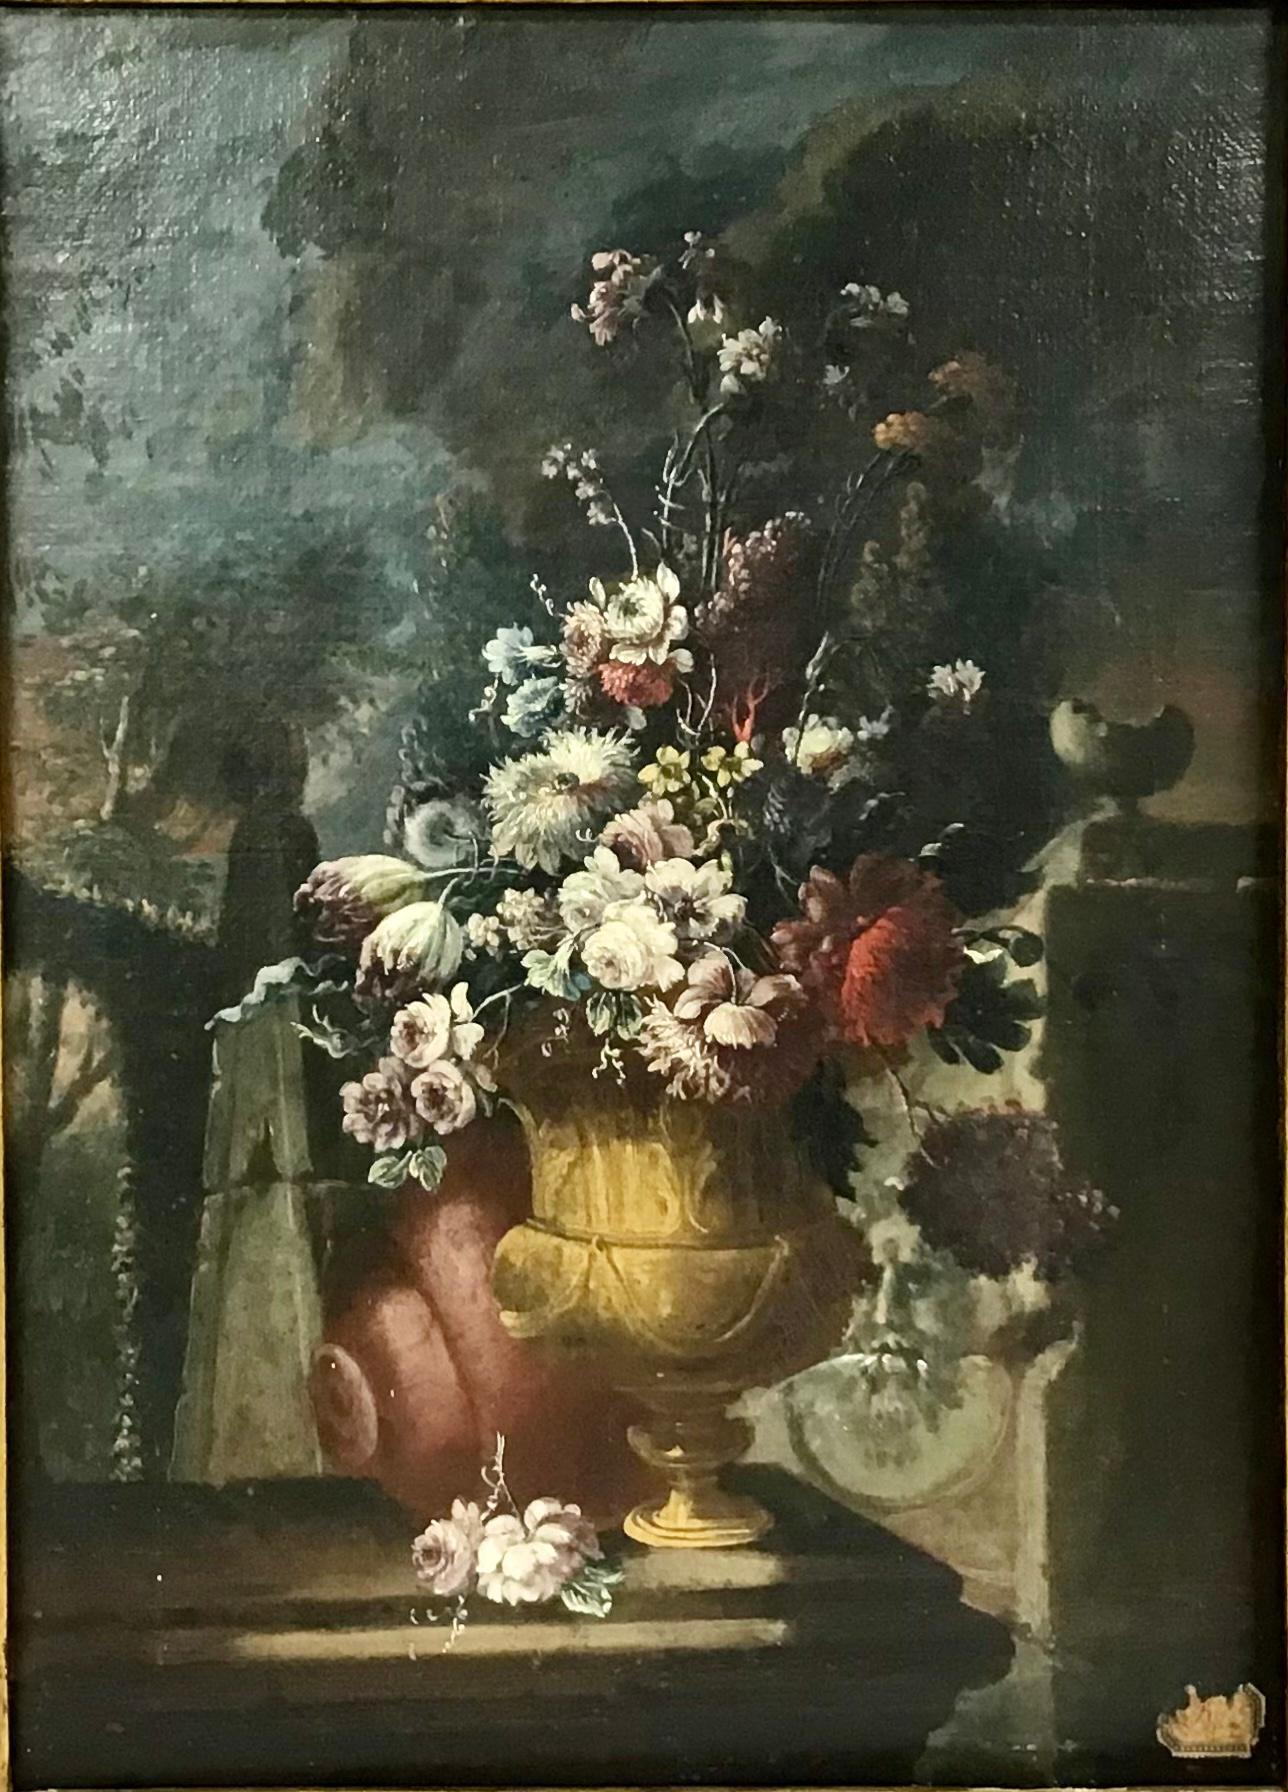 A beautiful Italian Still Life oil painting on old canvas of an urn holding a bouquet of assorted flowers set on a ledge. 17th century. The painting is in good antique condition. Some spots of in painting and paint loss, craquelure, and it has been